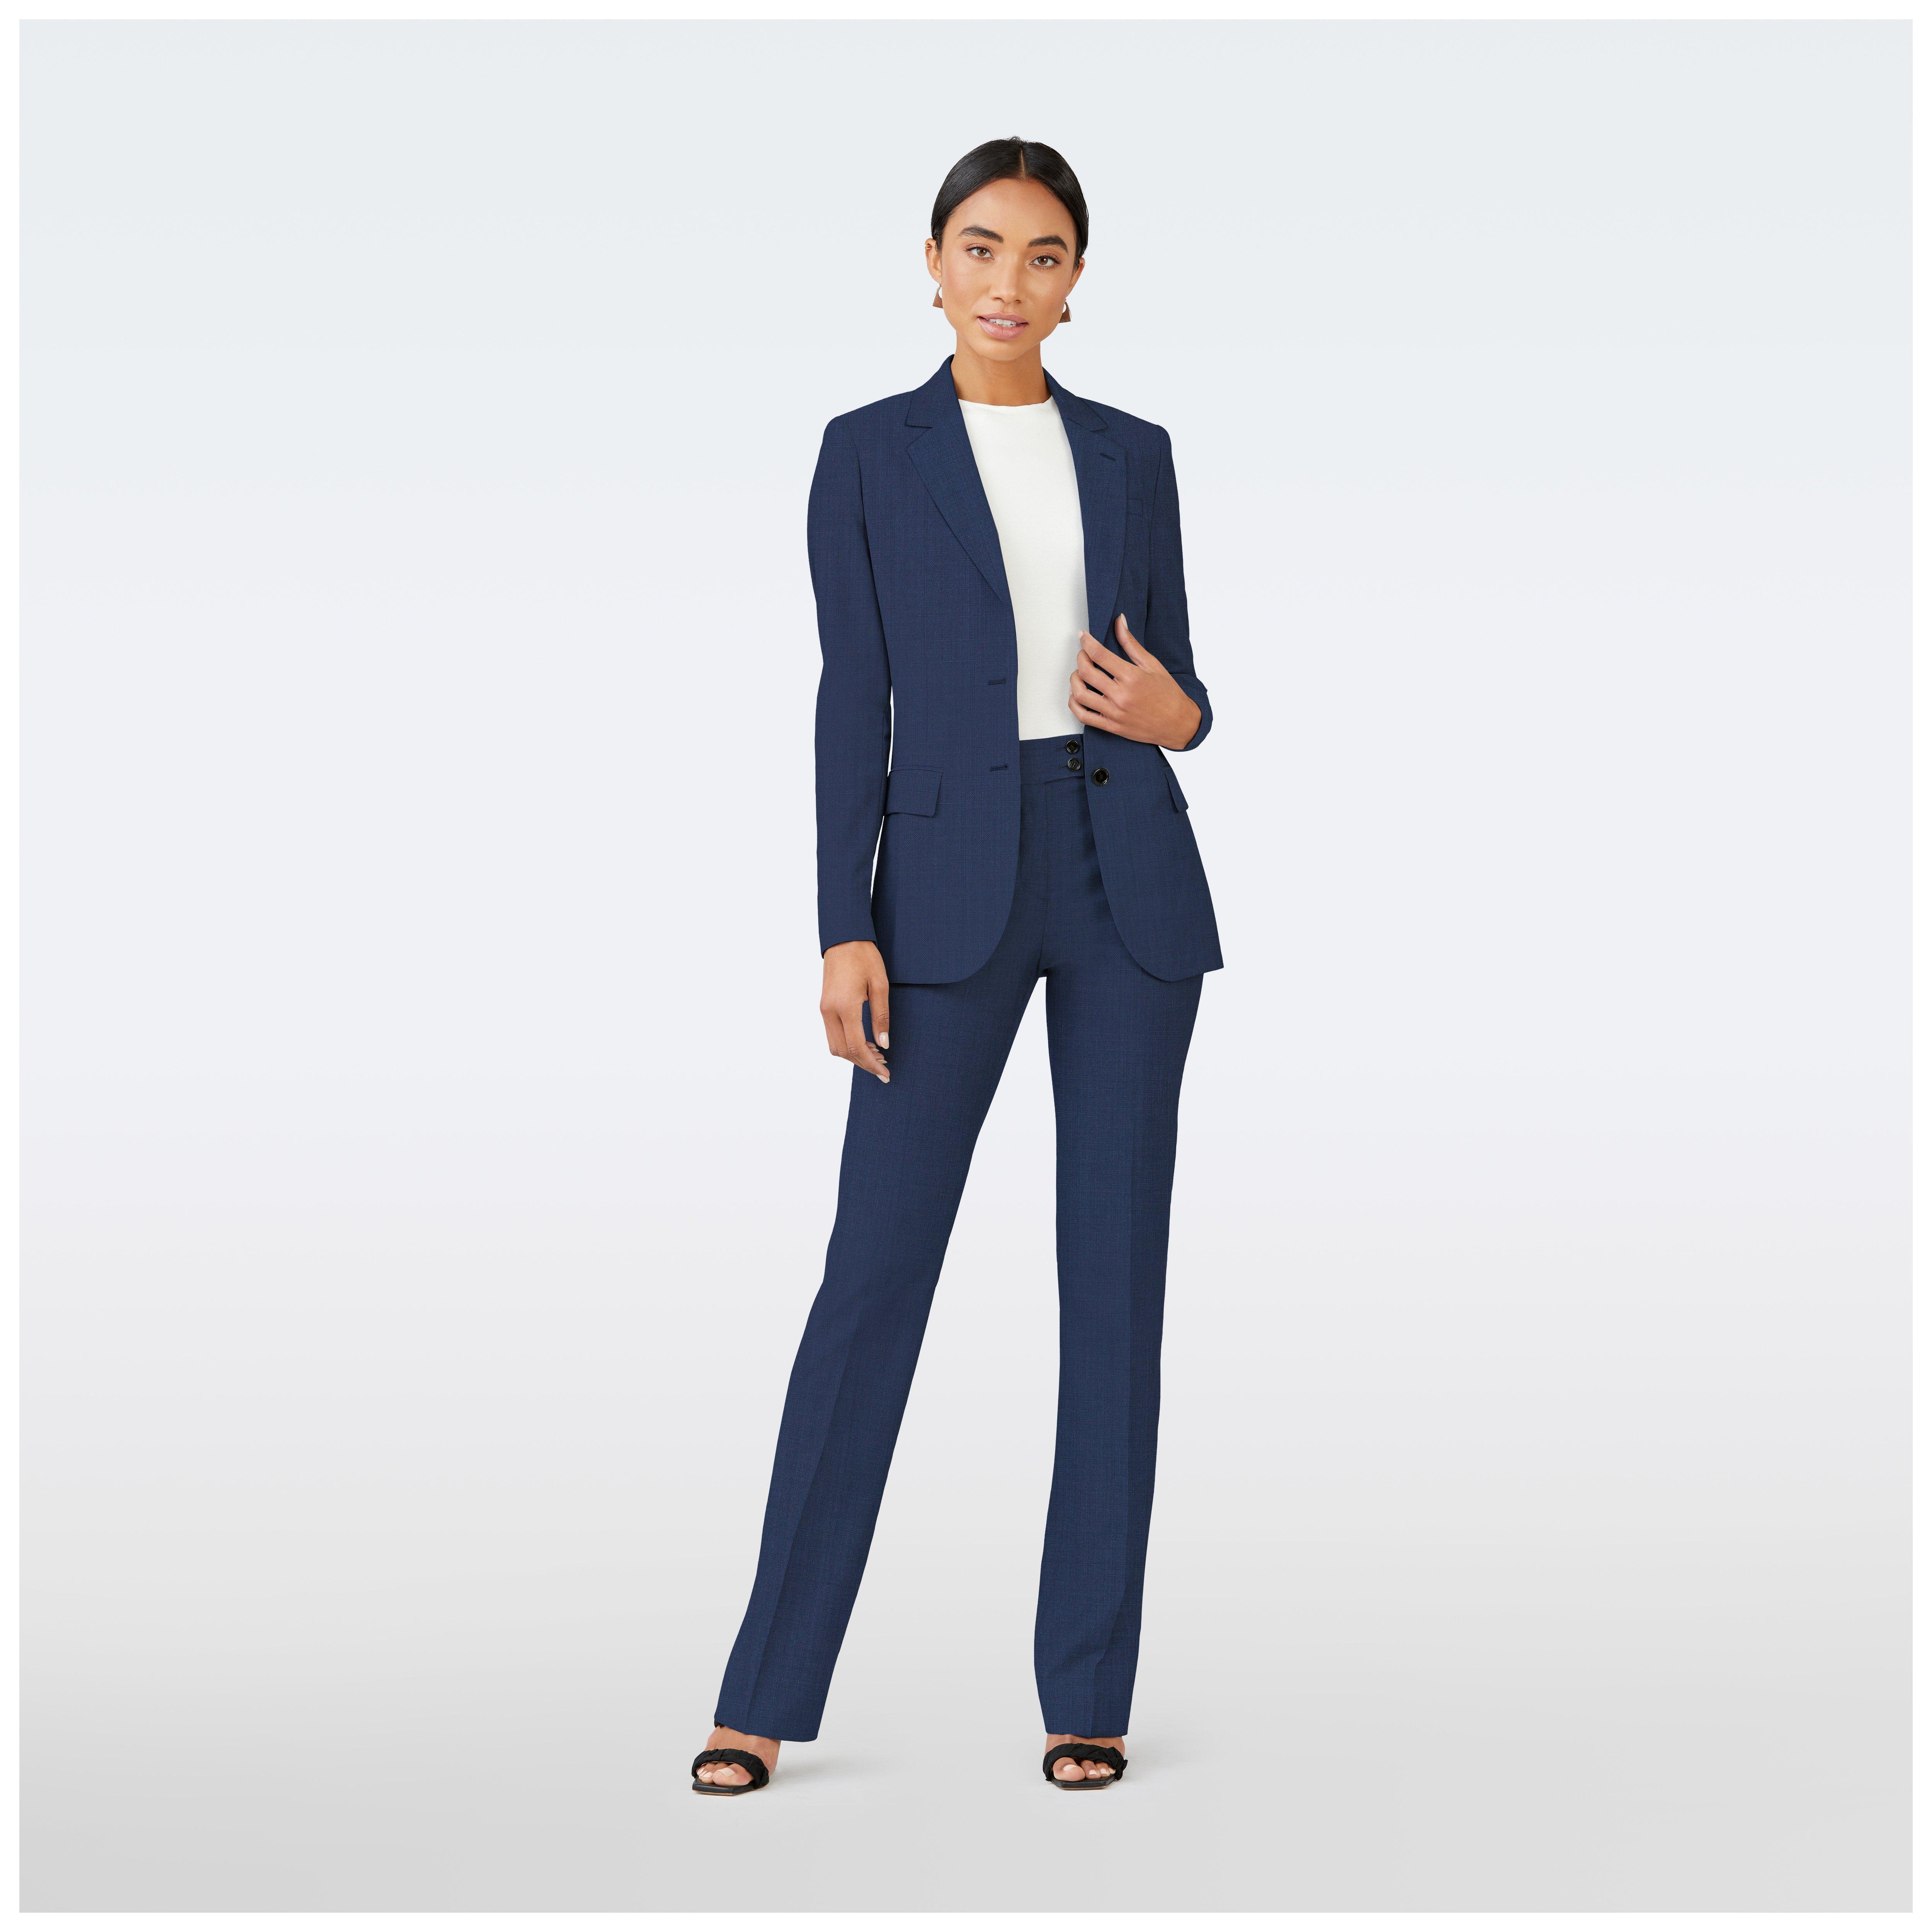 Women in suits and blazers | Suits for women, Suits, Dress suits